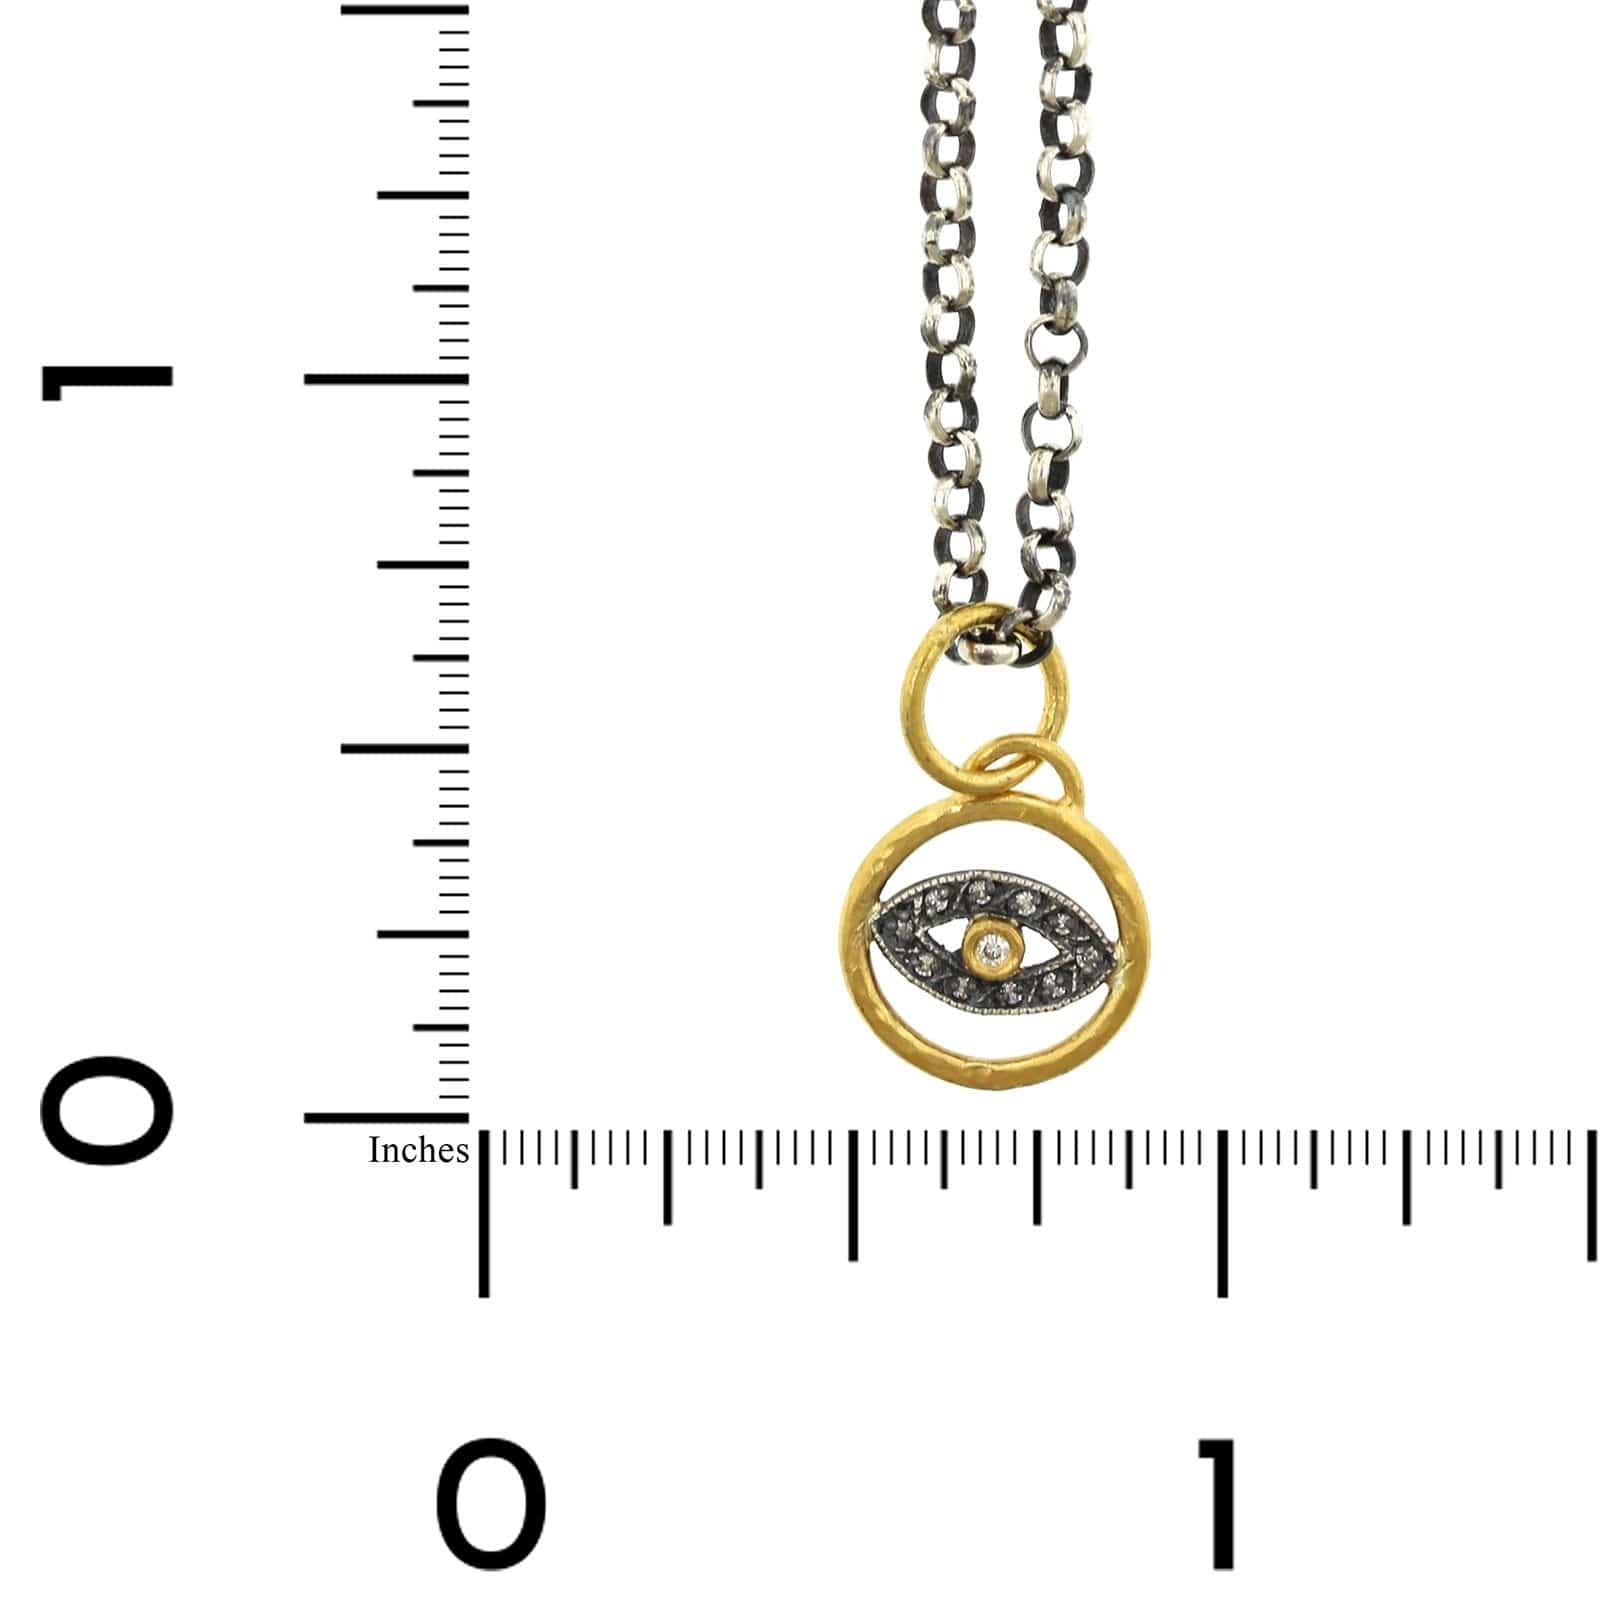 Sterling Silver and 24K Yellow Gold Evil Eye with Diamond Charm